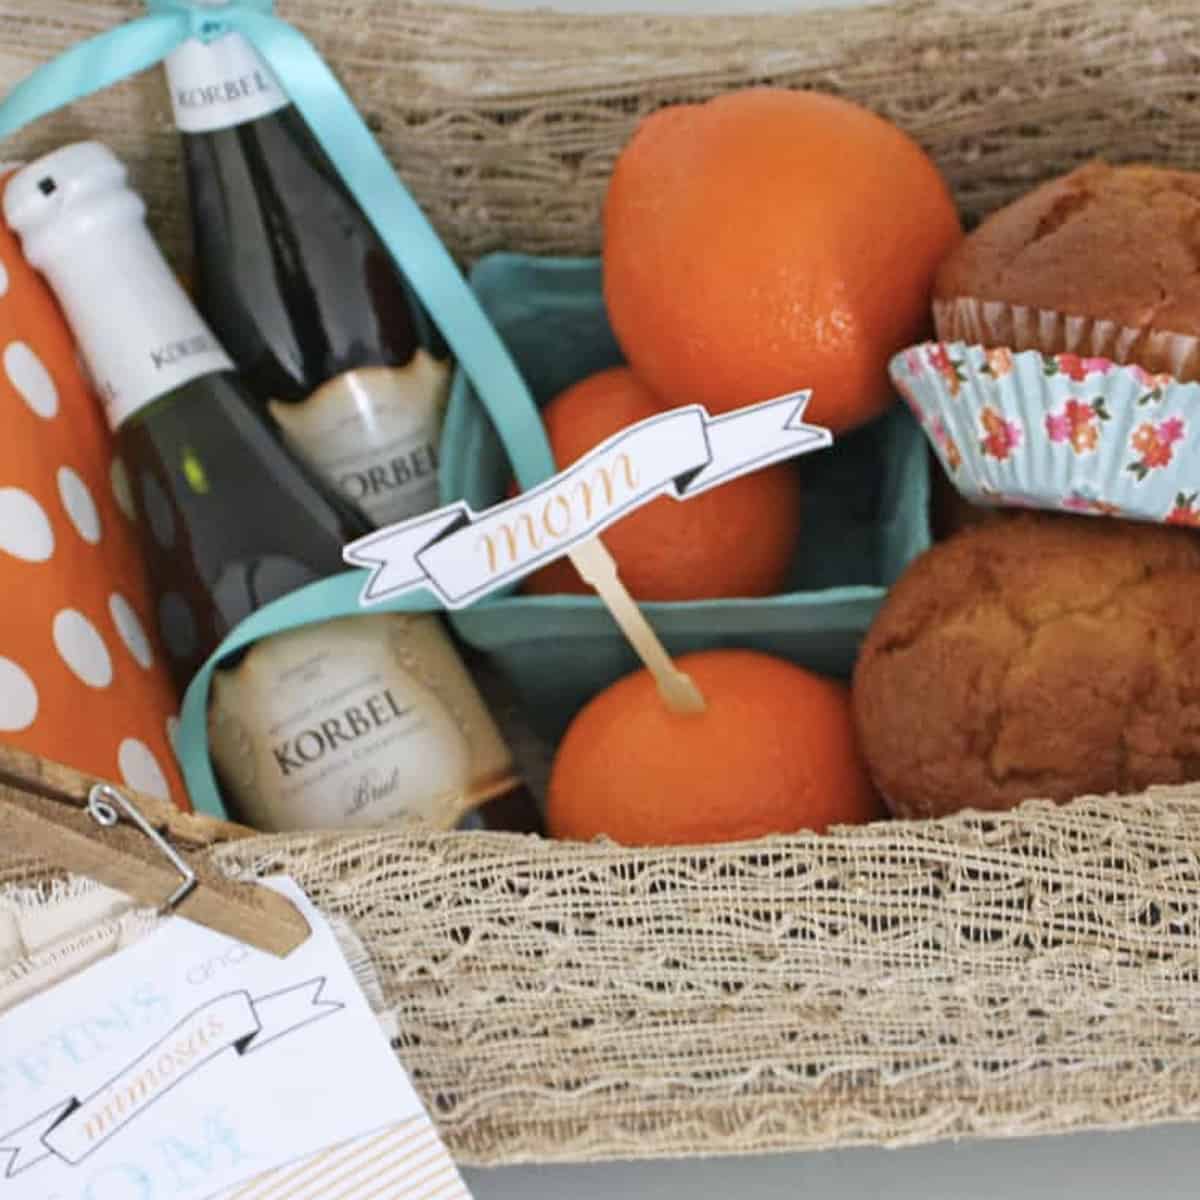 https://thoughtfullysimple.com/wp-content/uploads/2023/05/muffins-and-mimosas-mothers-day.jpg